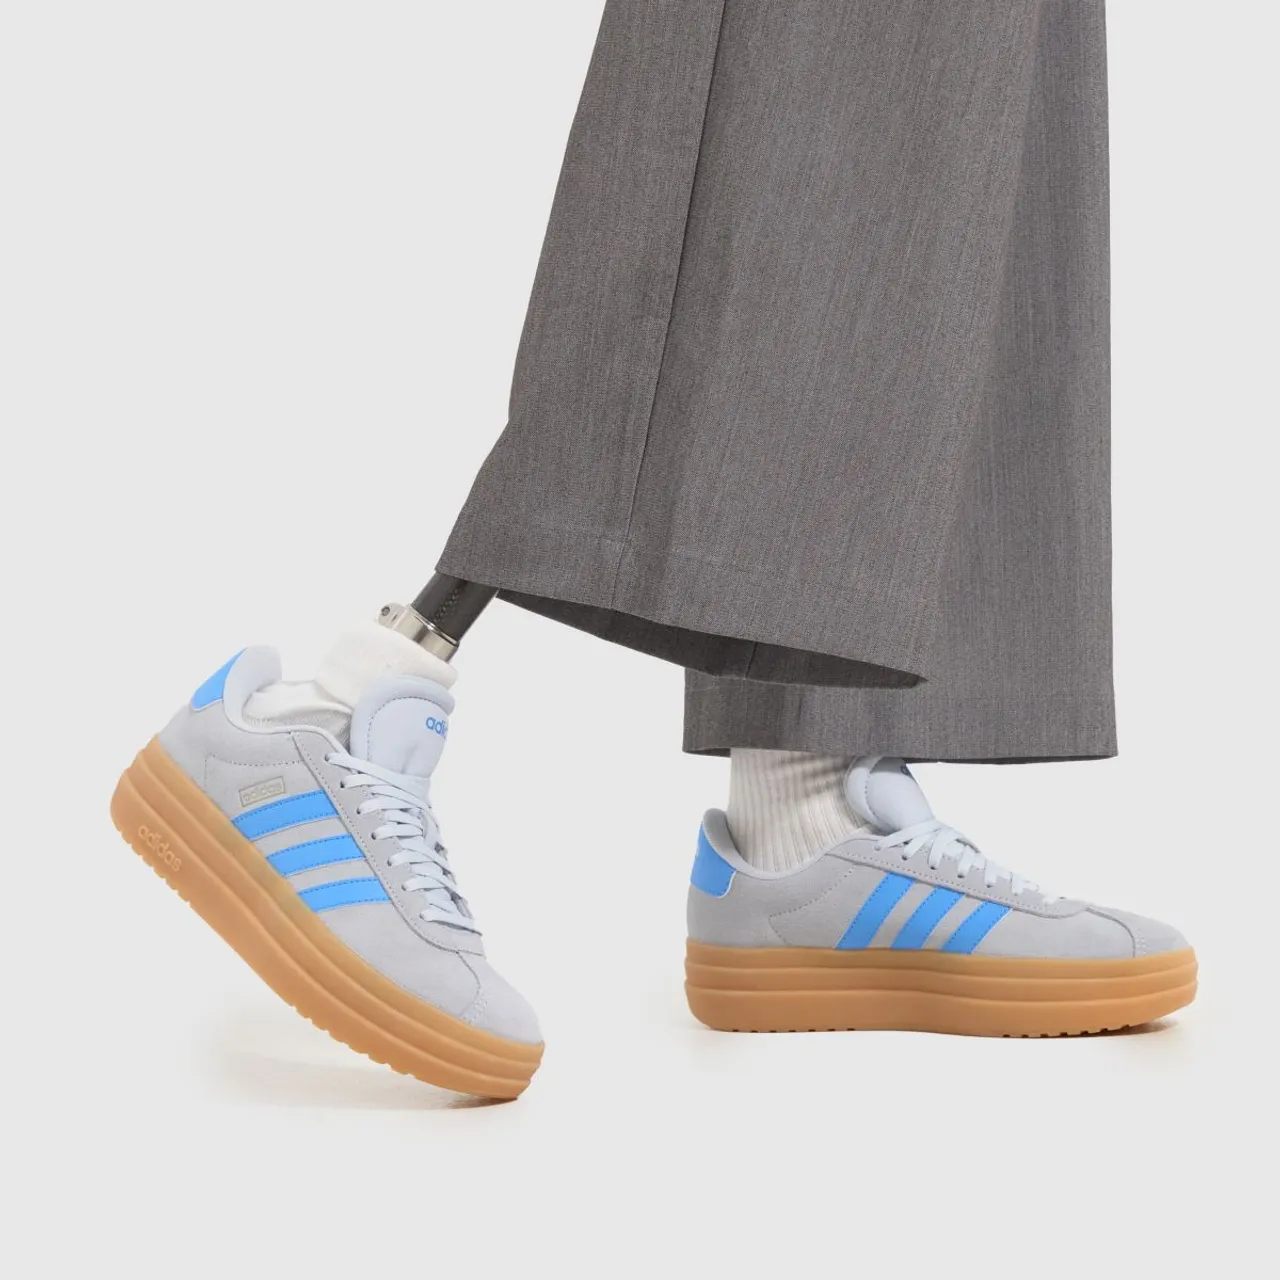 Adidas vl Court Bold Trainers in Blue Multi